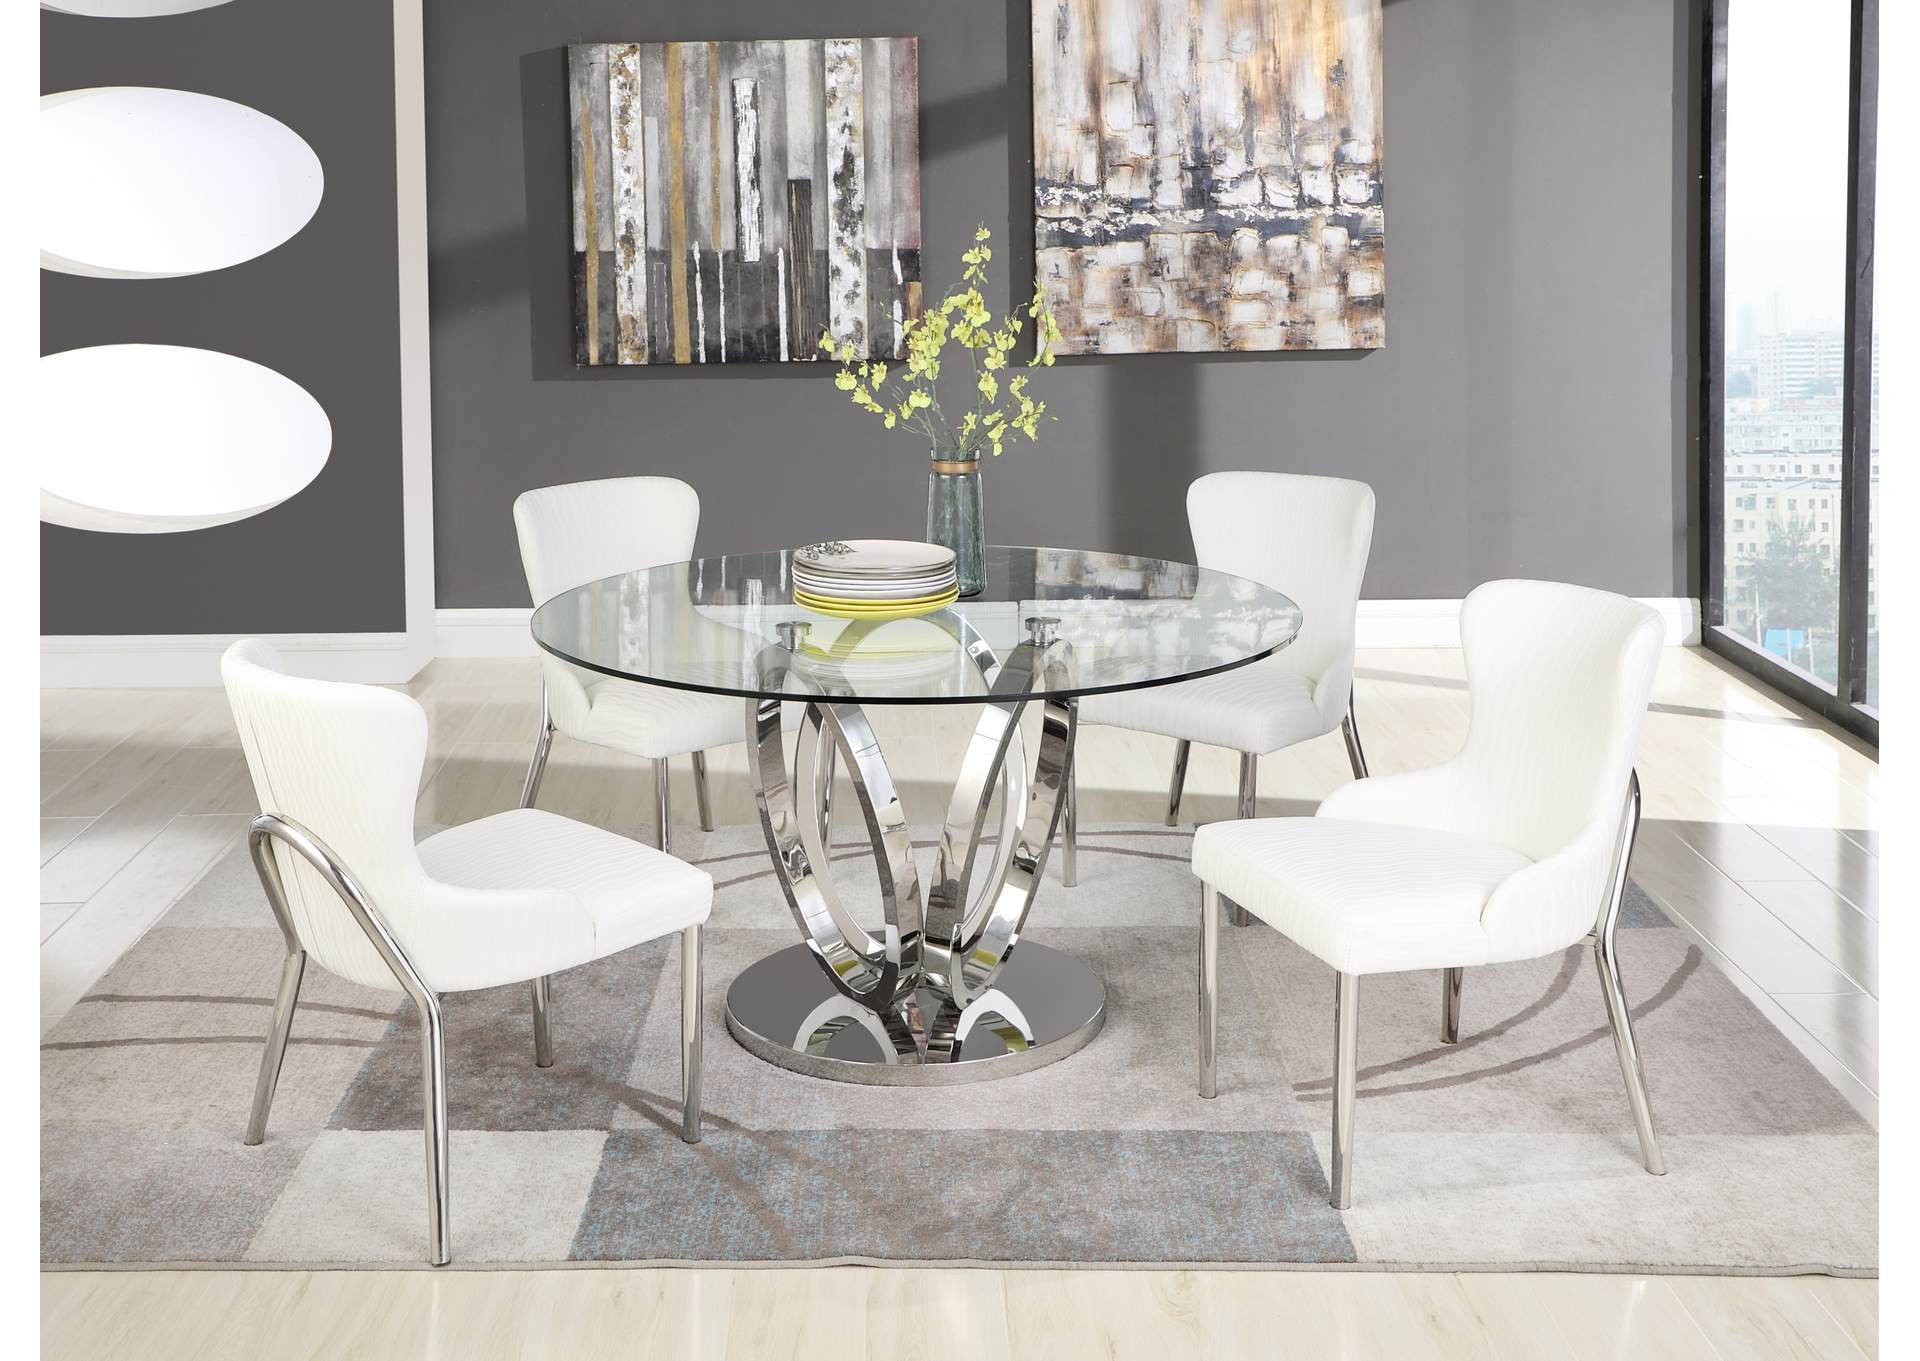 Evelyn Contemporary Dining Room Set w/ Glass Top Table & 4 Chairs,Chintaly Imports